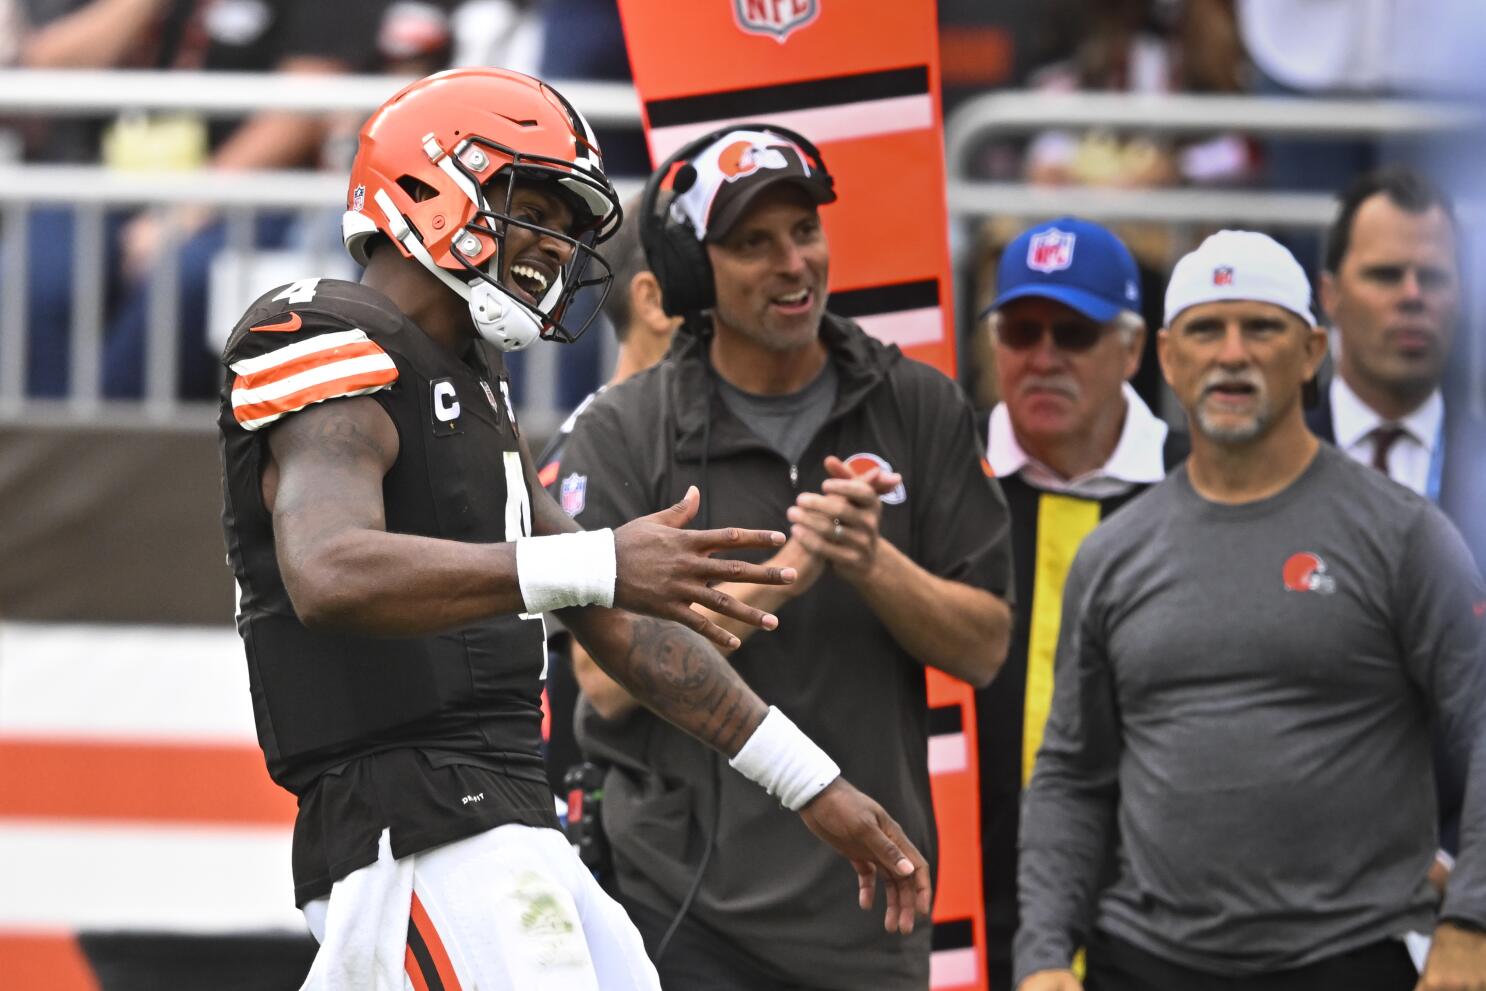 Deshaun Watson quiets critics with strong performance Browns hope